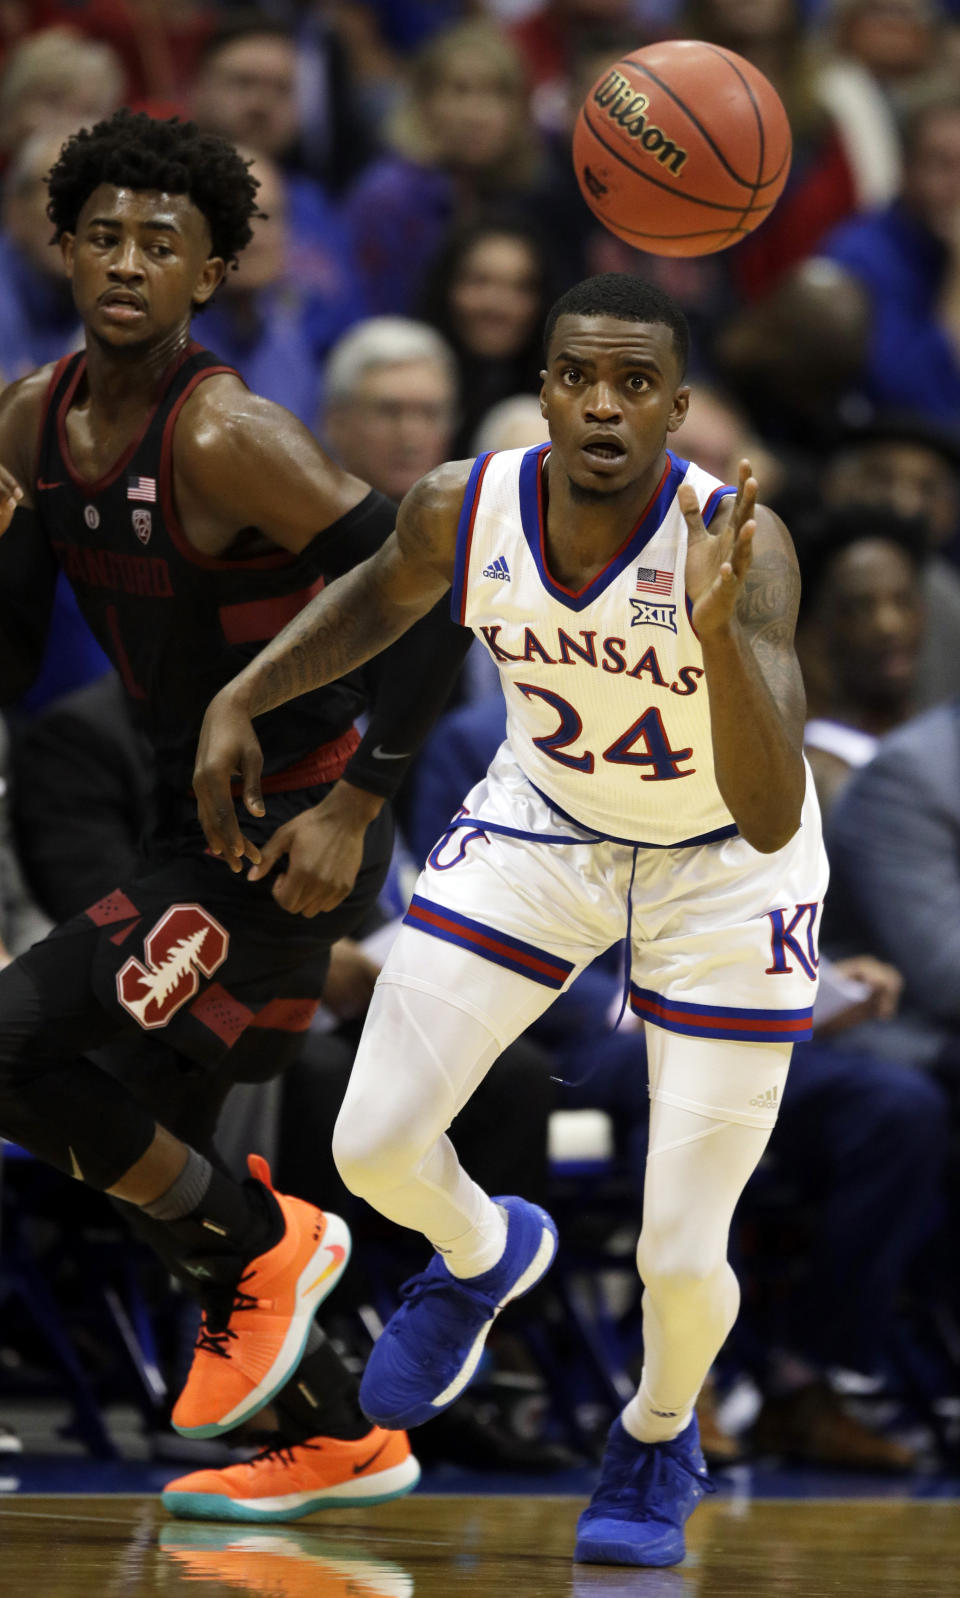 Kansas guard Lagerald Vick (24) steals the ball from Stanford guard Daejon Davis (1) during the first half of an NCAA college basketball game in Lawrence, Kan., Saturday, Dec. 1, 2018. (AP Photo/Orlin Wagner)